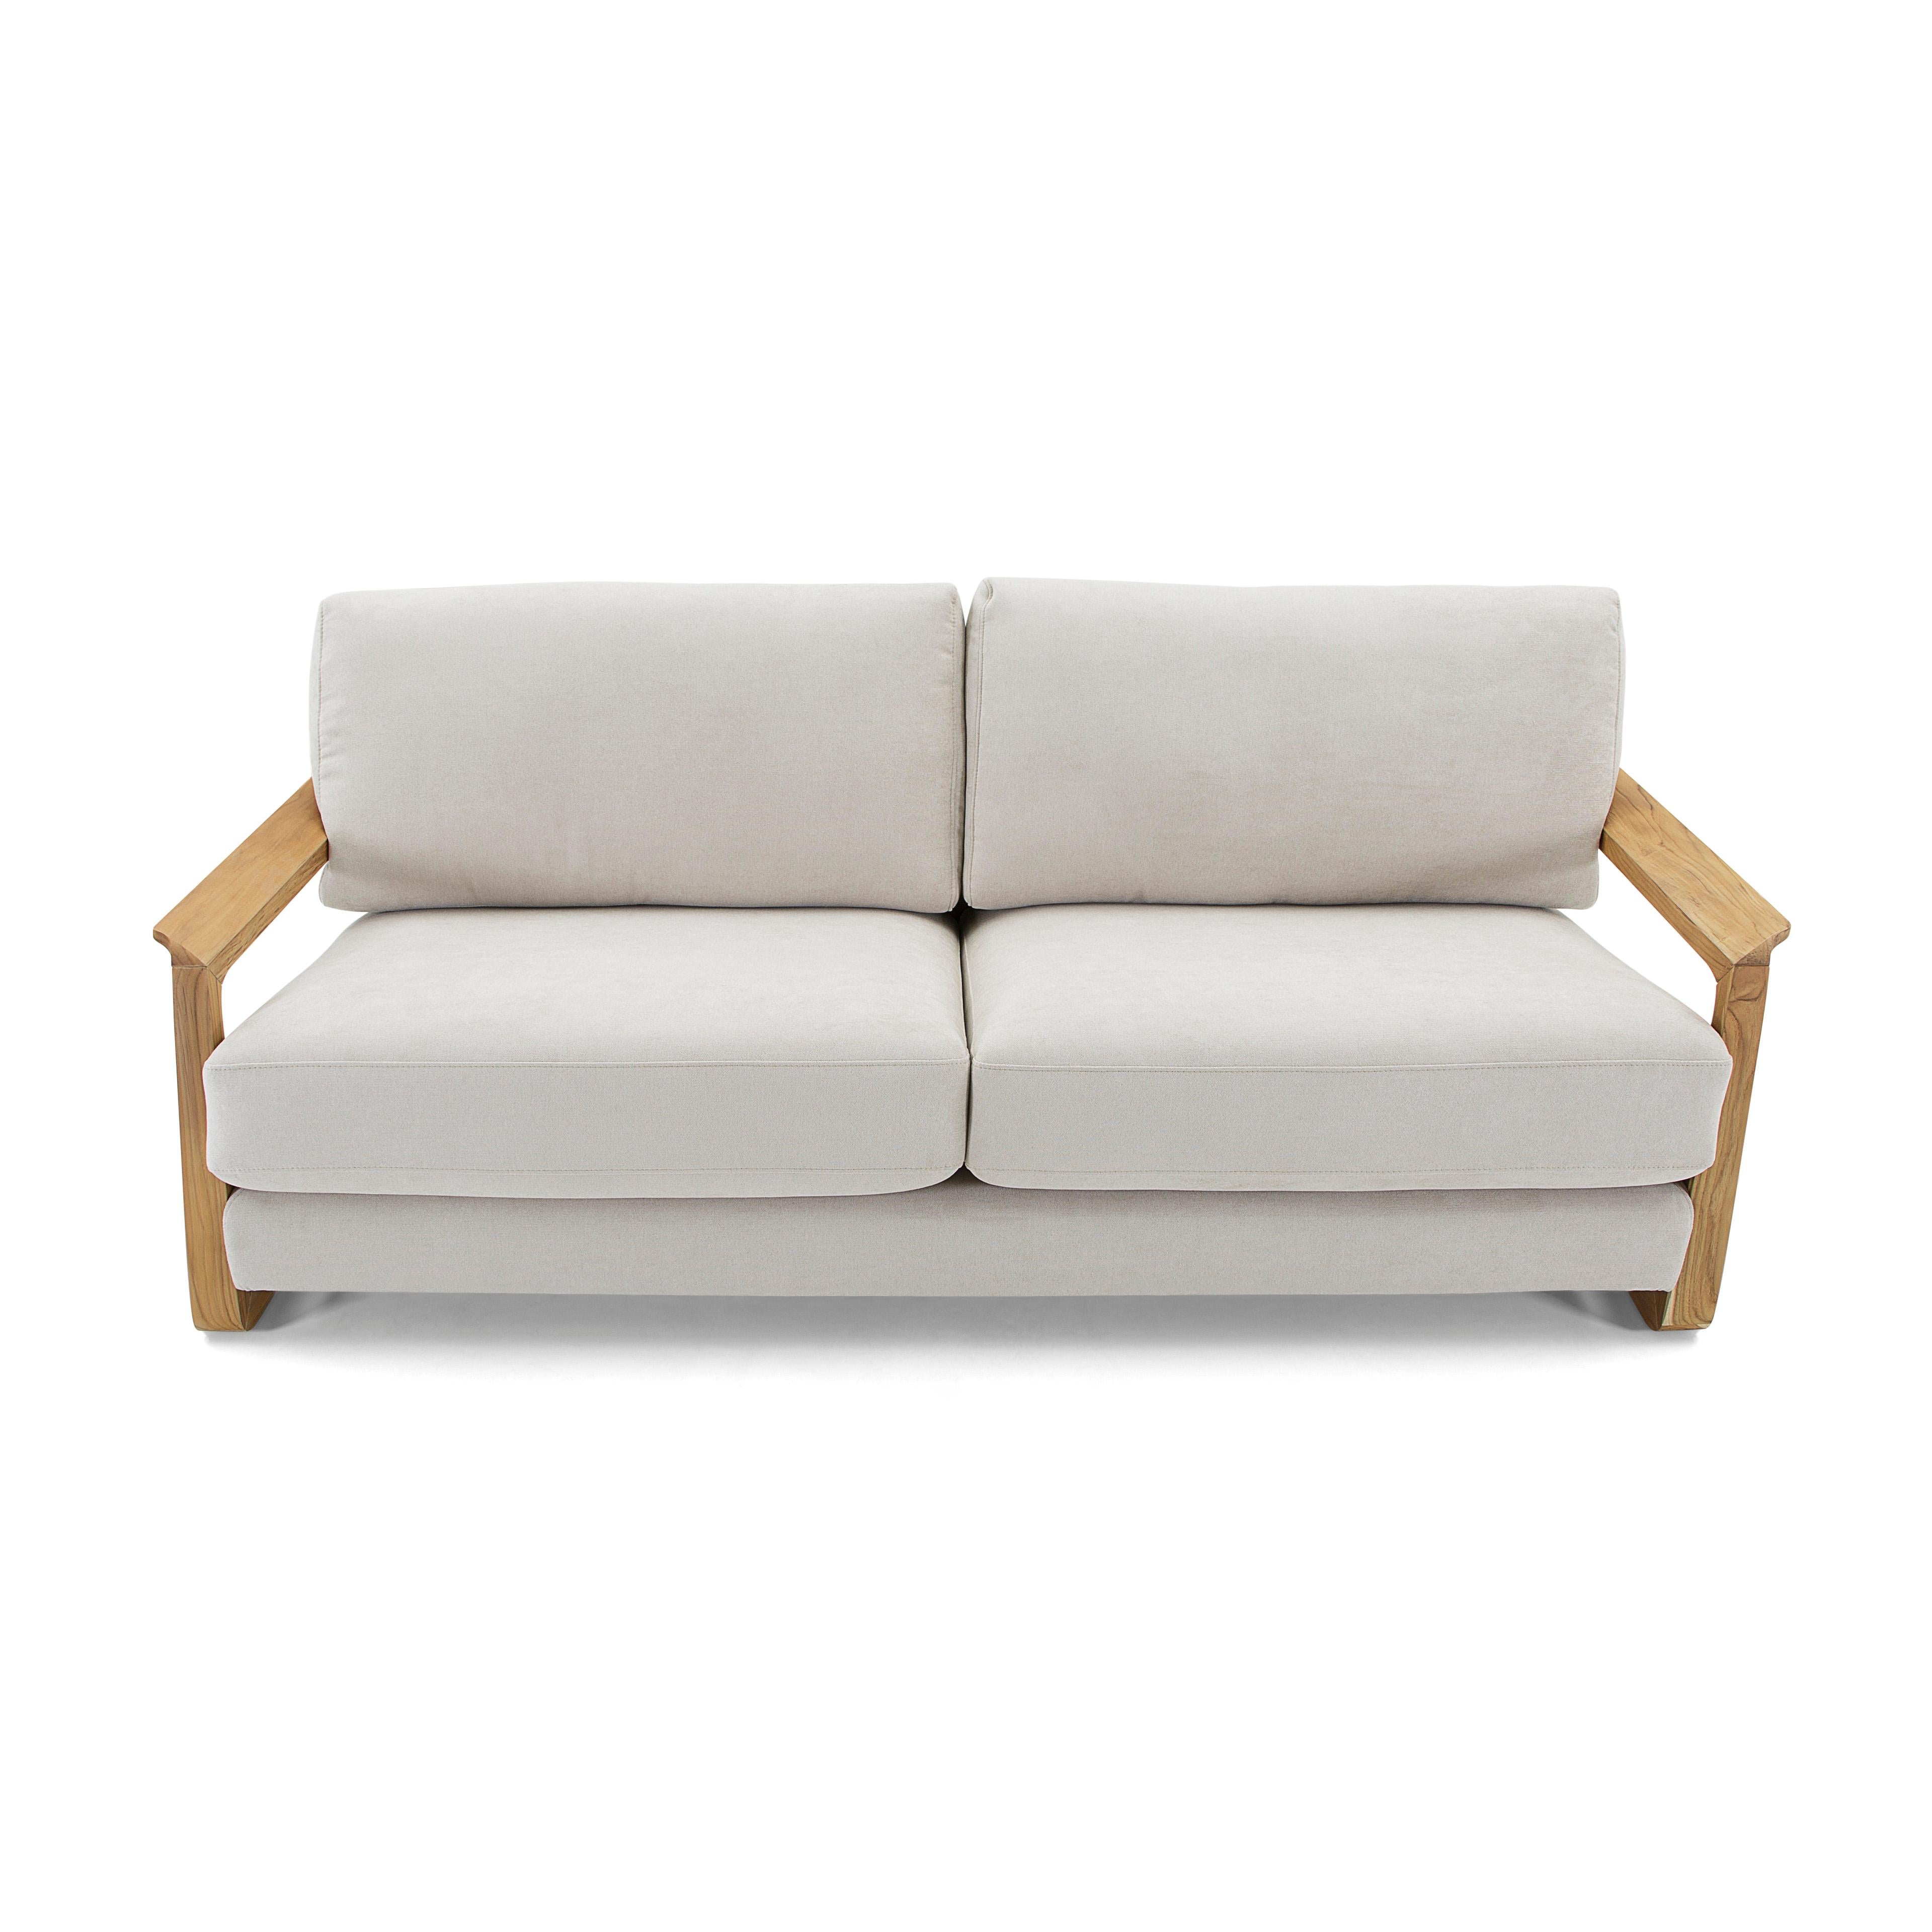 Brazilian Fine Three-Seat Sofa Upholstered in an Oatmeal Fabric and Teak Wood Arms For Sale